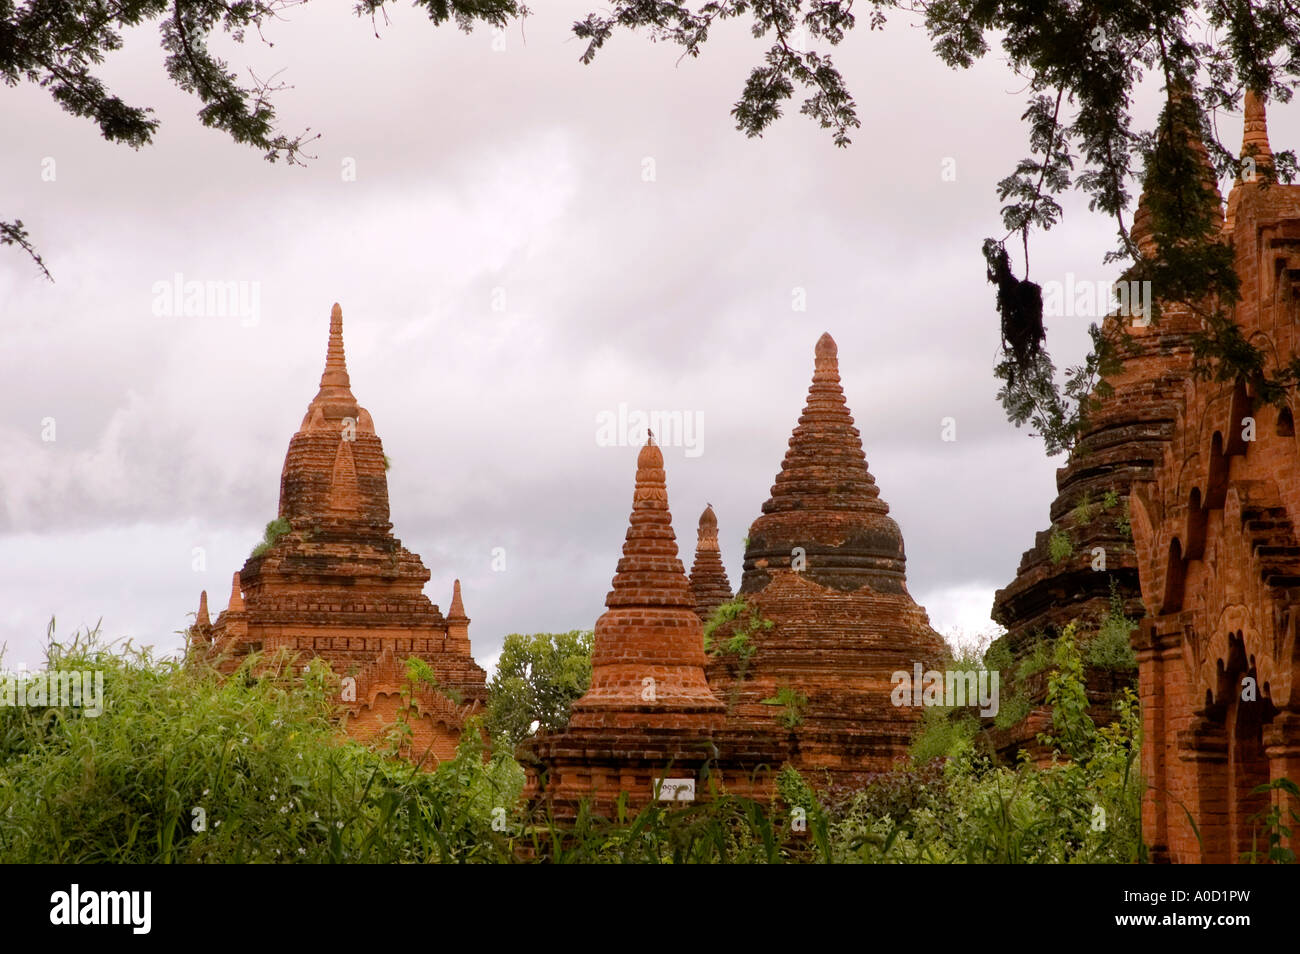 Stock photograph of the Khay min gha Pahto at Bagan in Myanmar 2006 Stock Photo